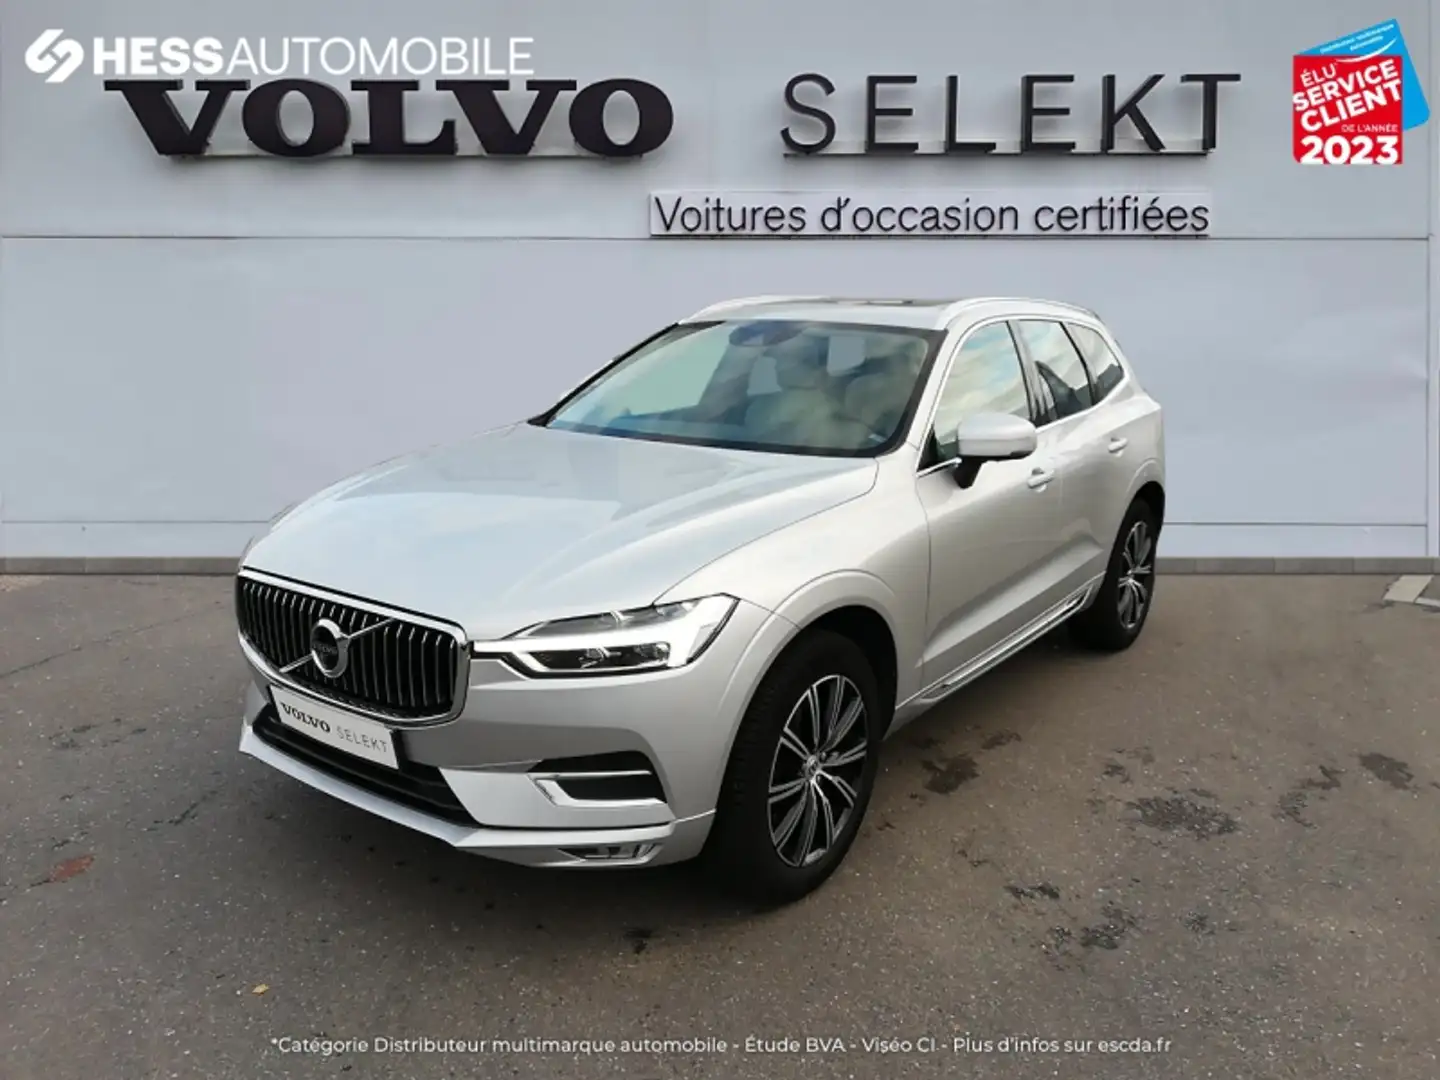 Volvo XC60 T5 AWD 250ch Inscription Luxe Geartronic - 1